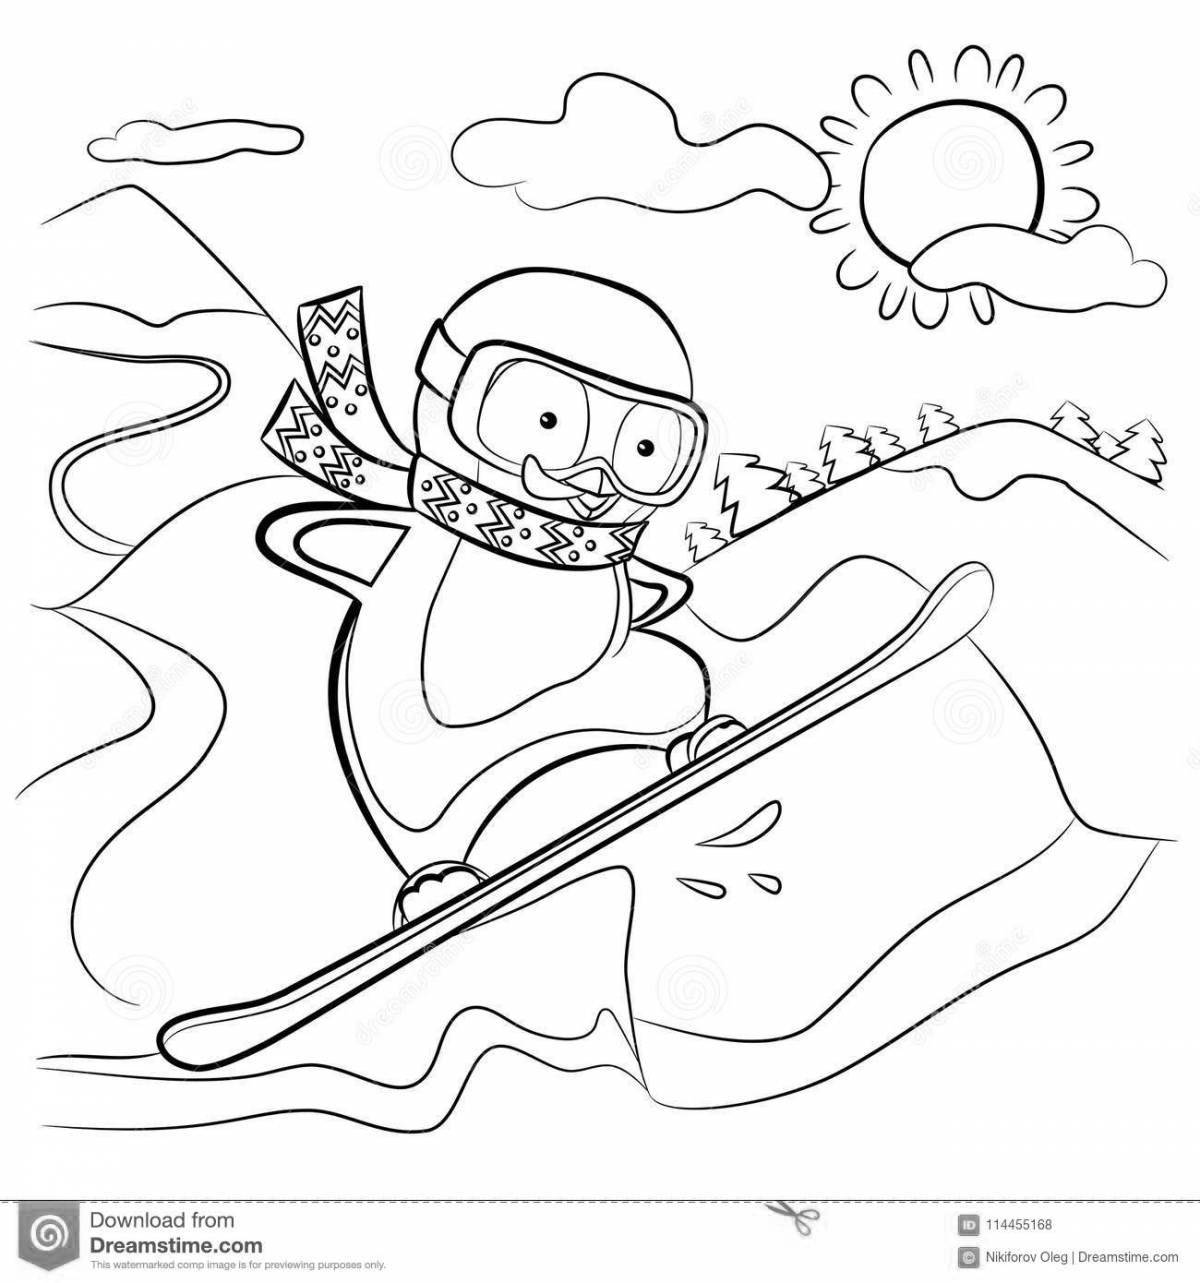 Snowboarder live coloring for kids